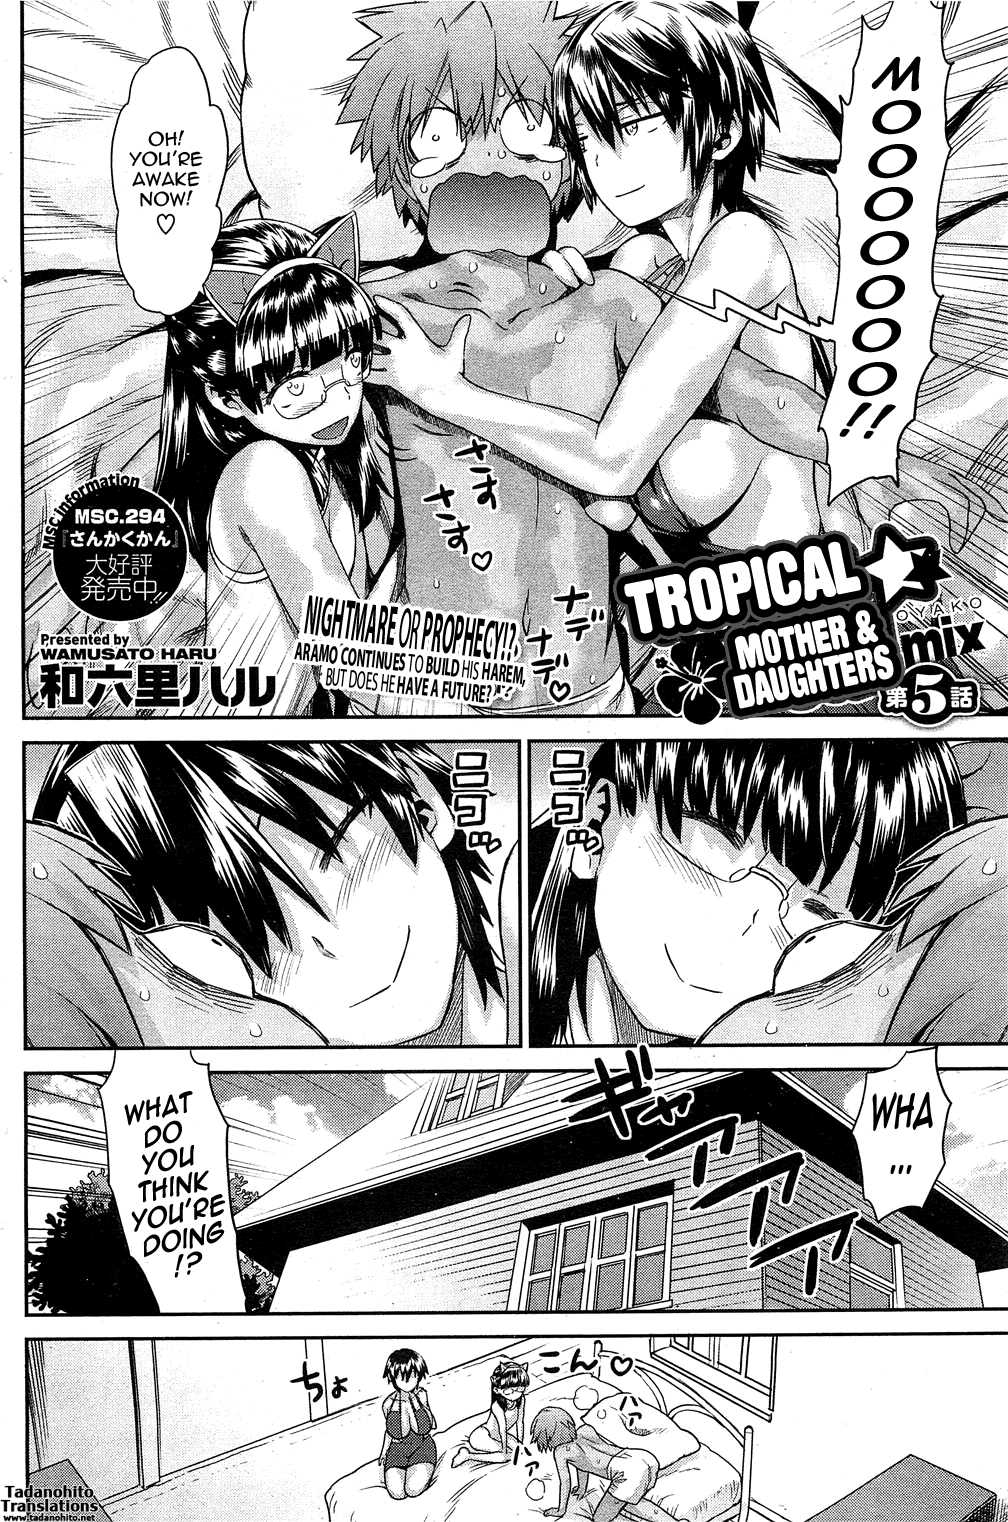 Hentai Manga Comic-Tropical Mother & Daughters Mix-Chapter 5-Nightmare Or Prophecy !?-2